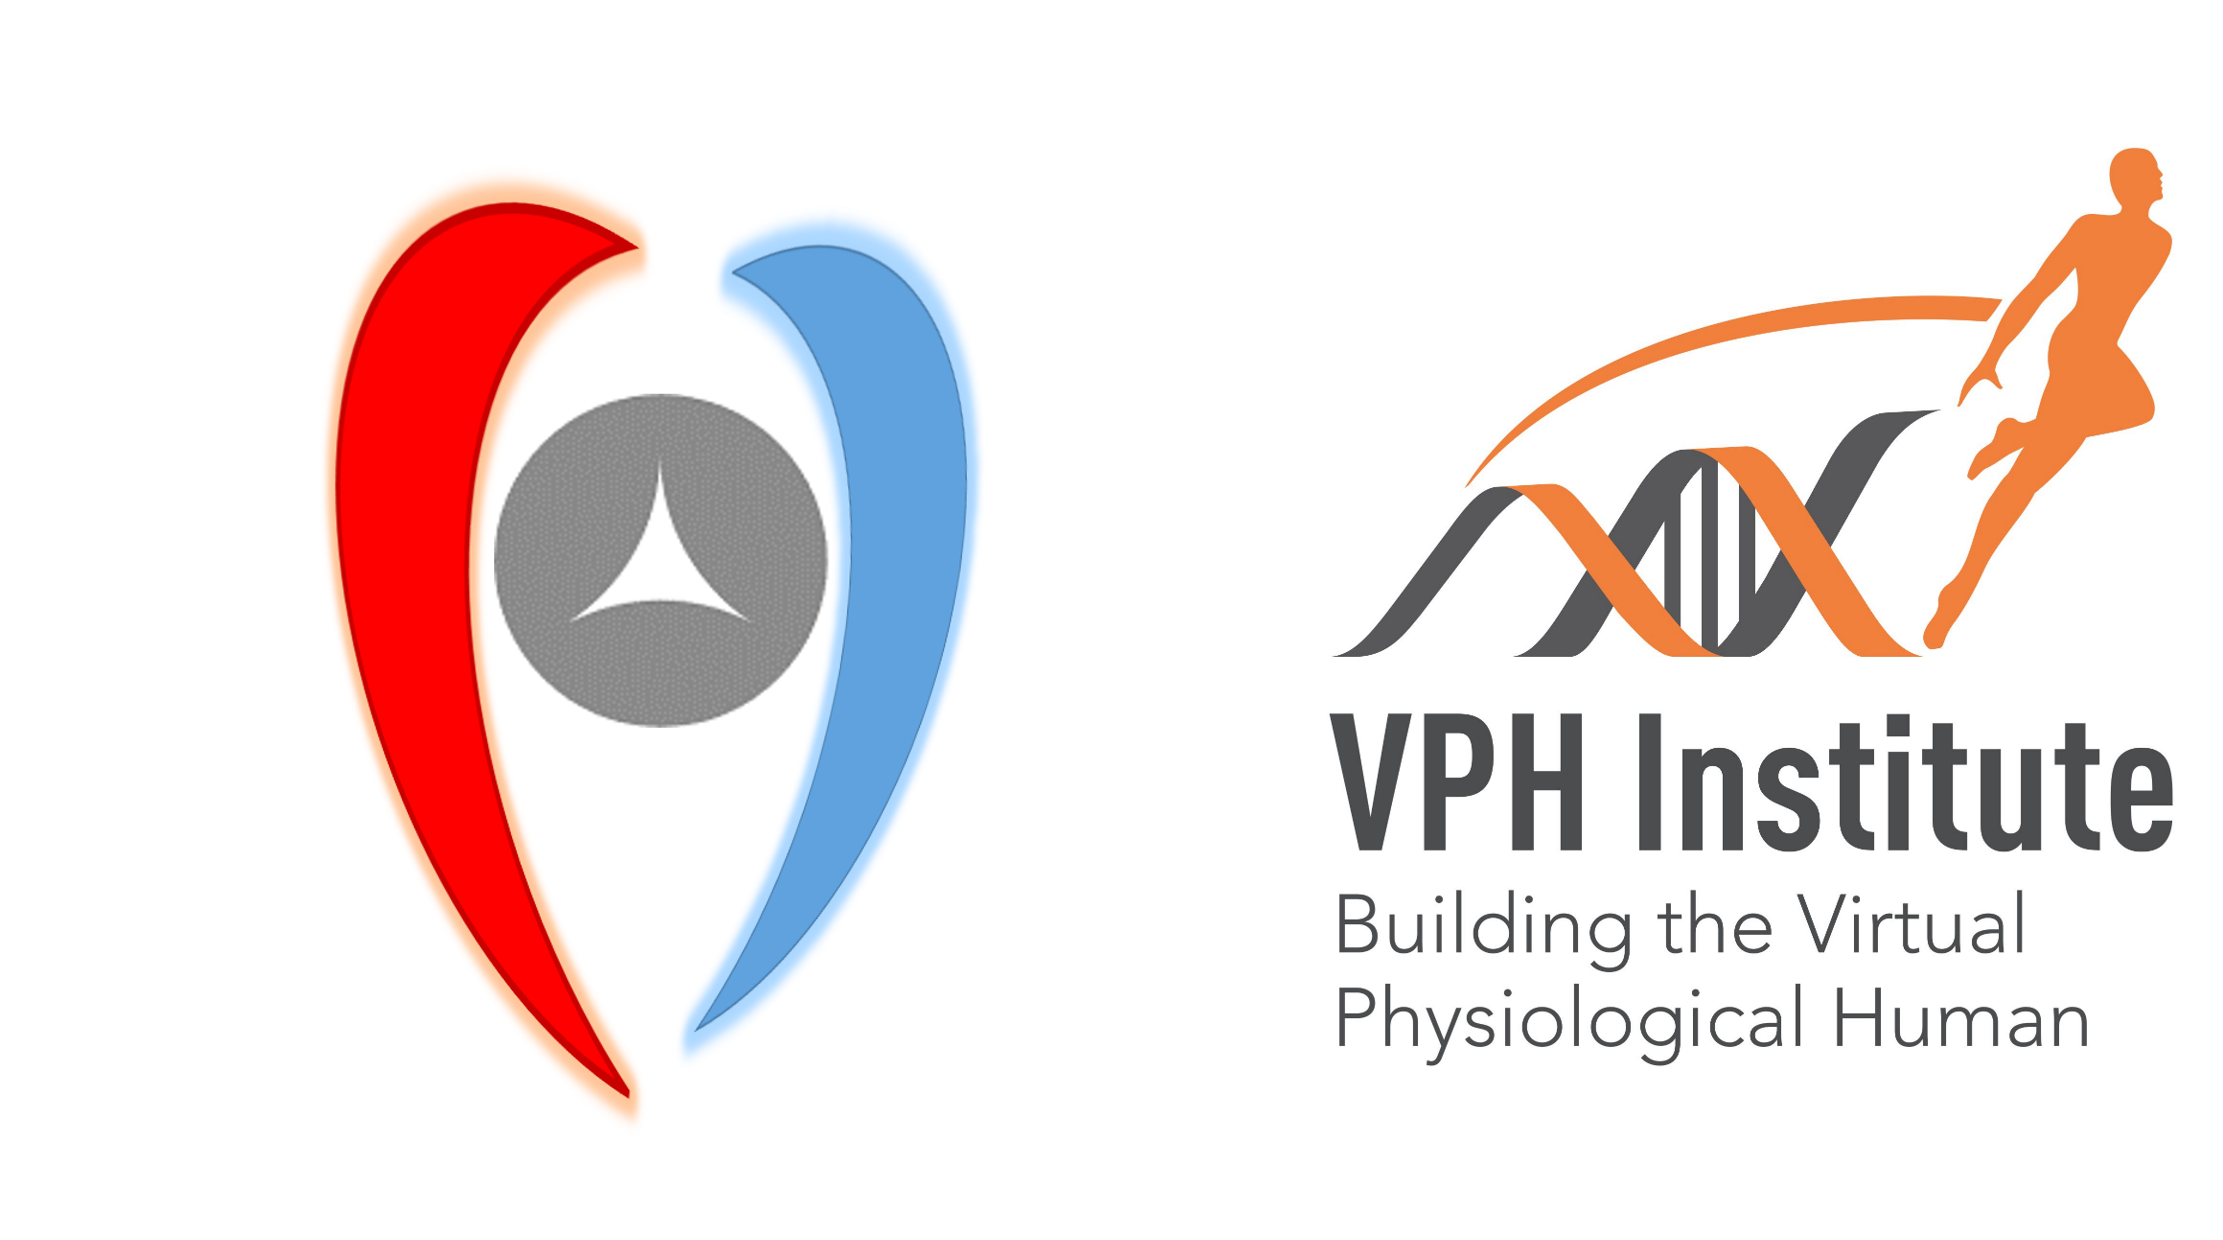 VPH Institute and SimInSitu: a joint strategy for comunication and dissemination